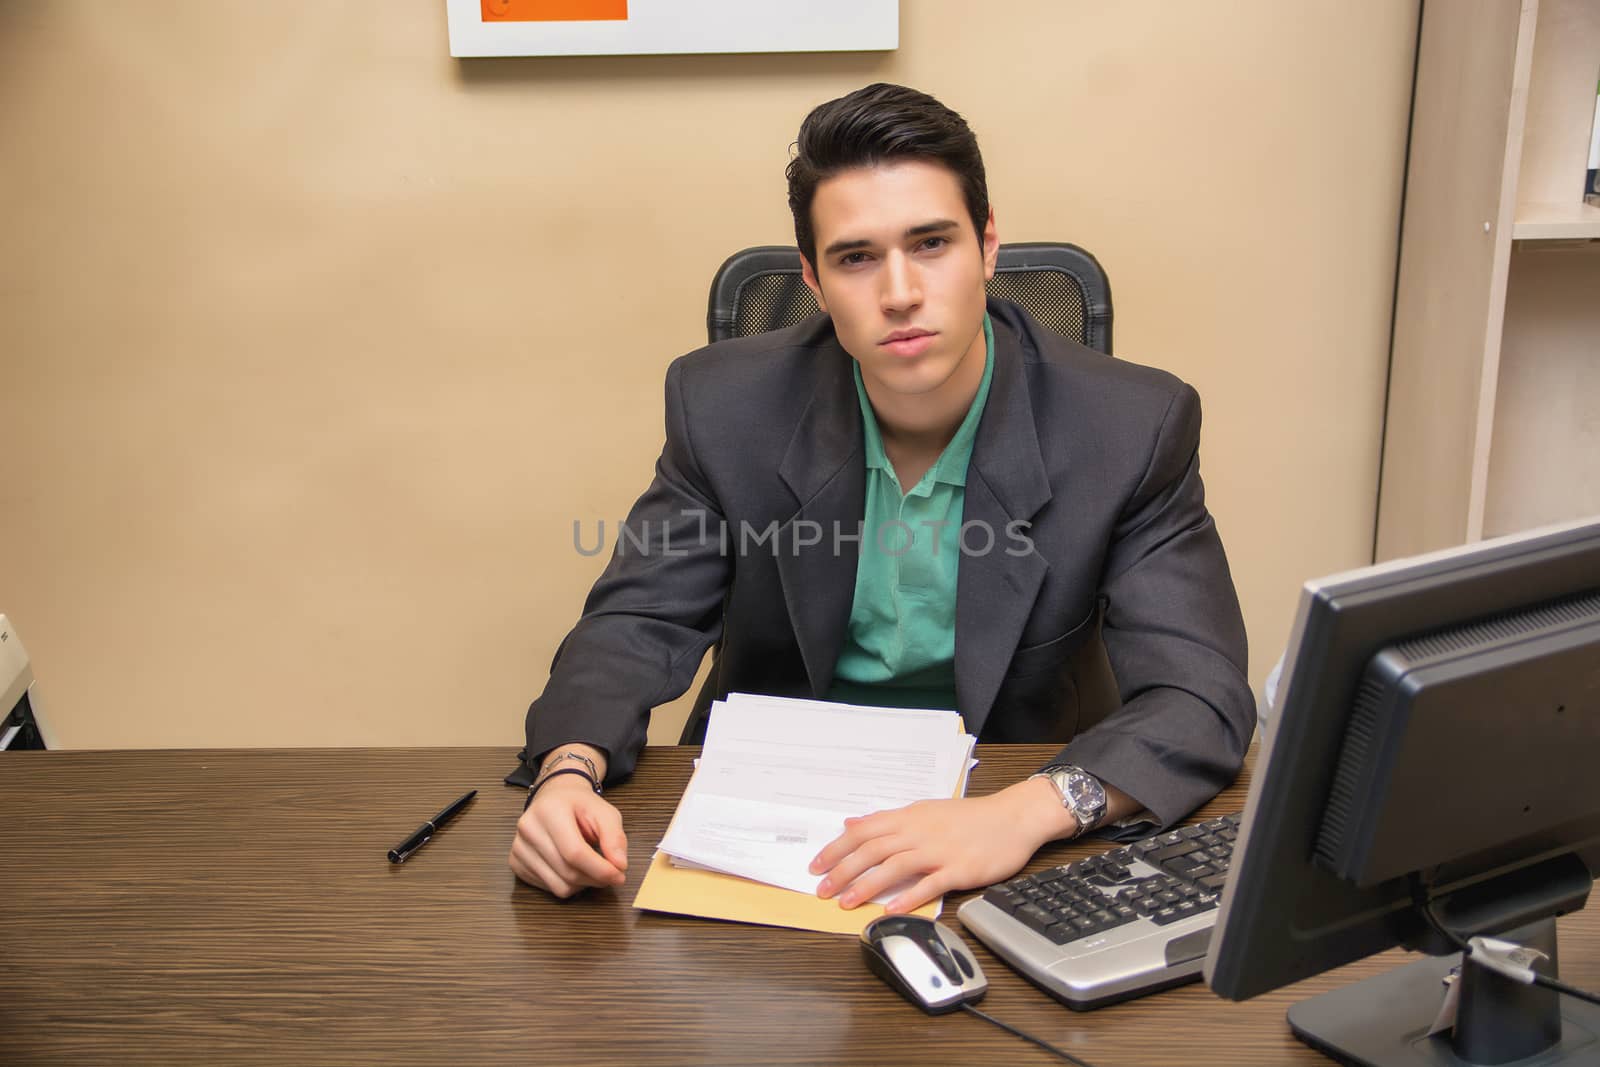 Handsome young businessman sitting at desk in office by artofphoto